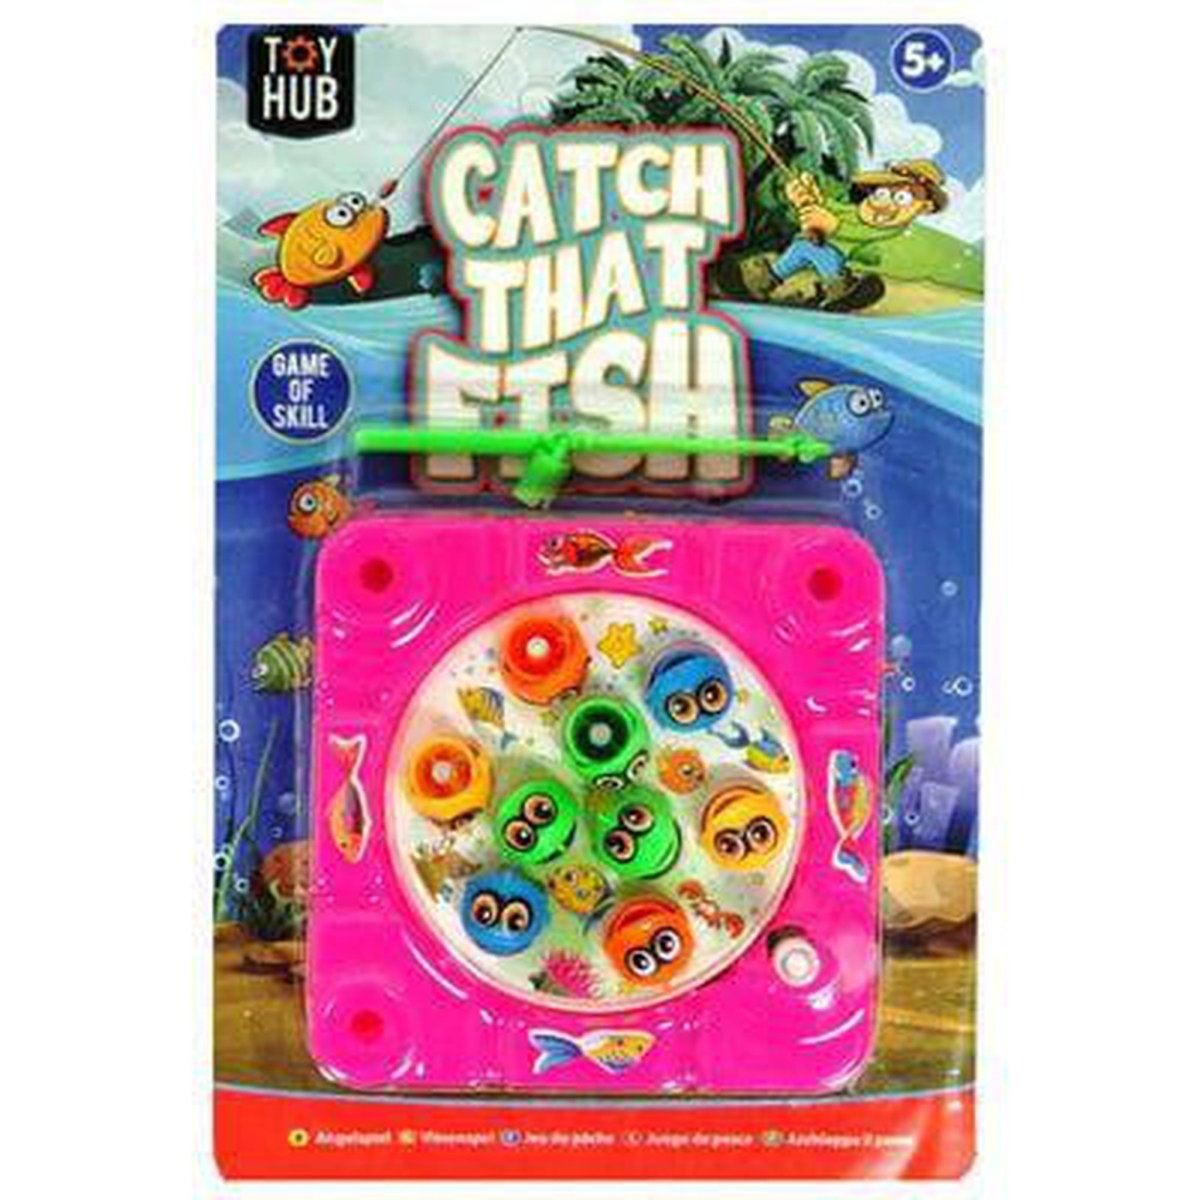 Catch That Fish - Kids Party Craft